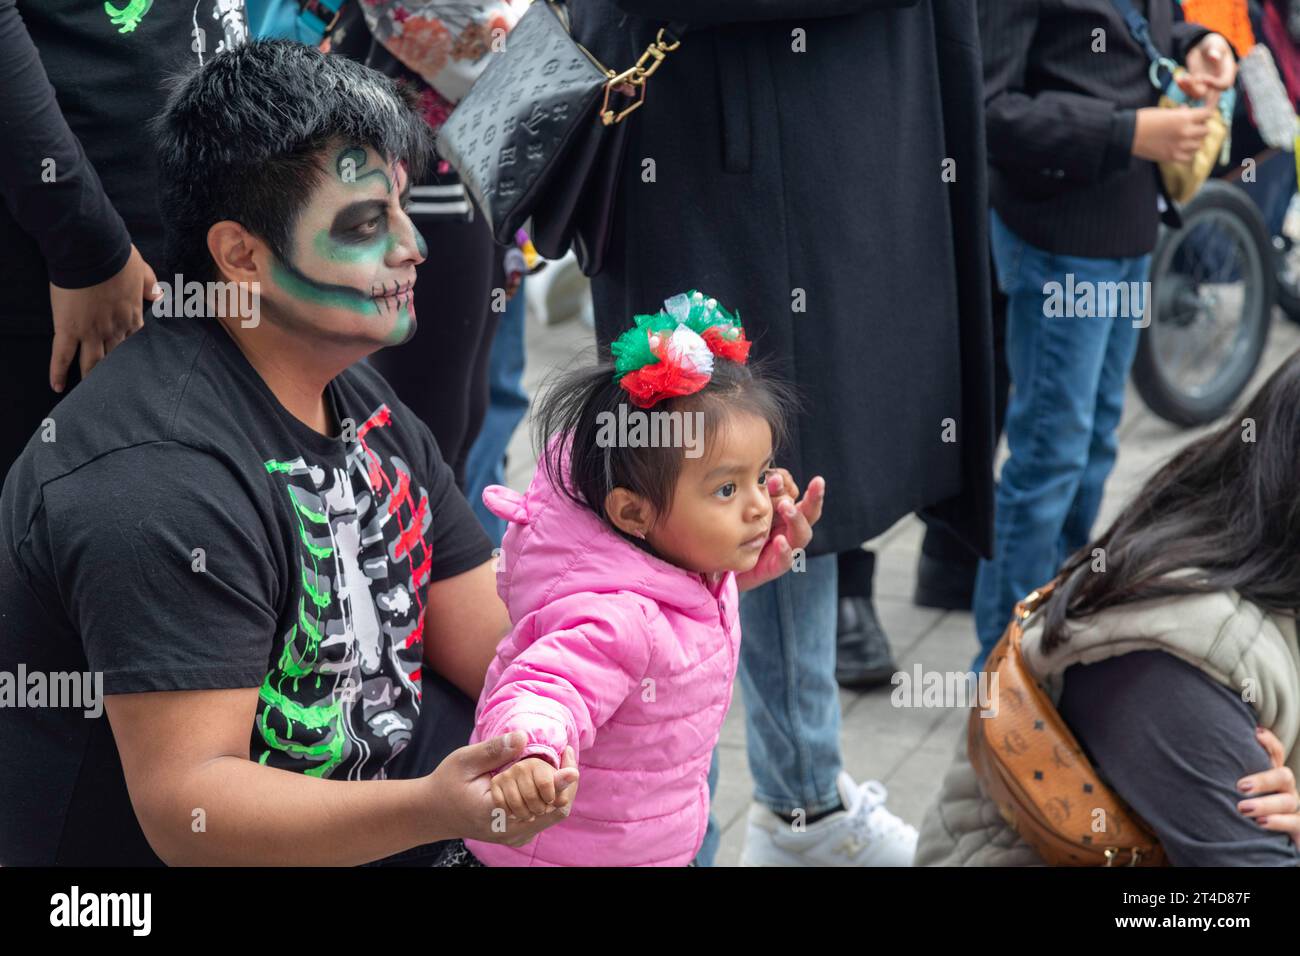 Detroit, Michigan - A man and a child watch dancers at the Day of the Dead celebration at Valade Park on the Detroit Riverfront. Stock Photo